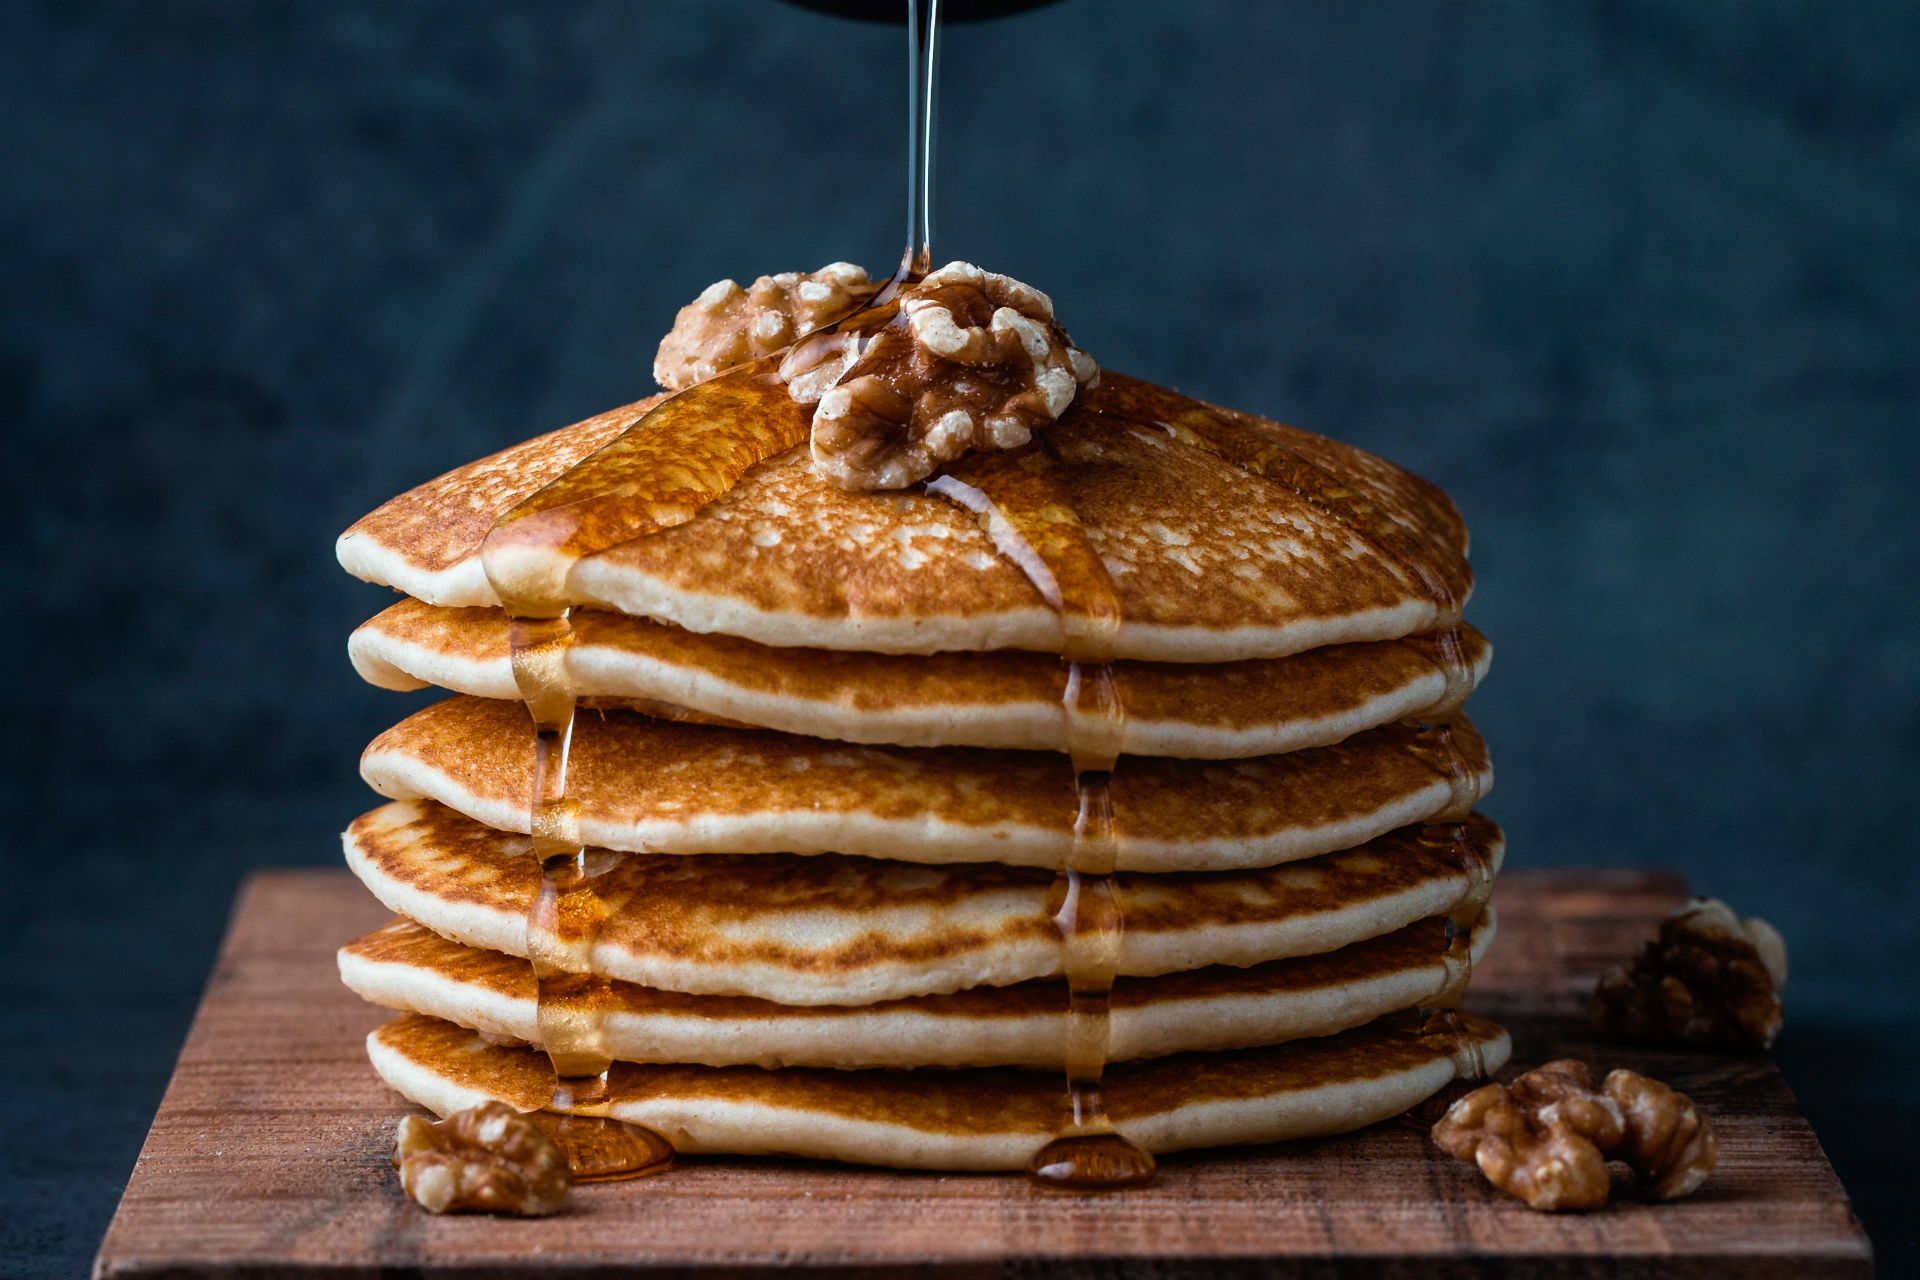 stack of pancakes with walnuts and syrup